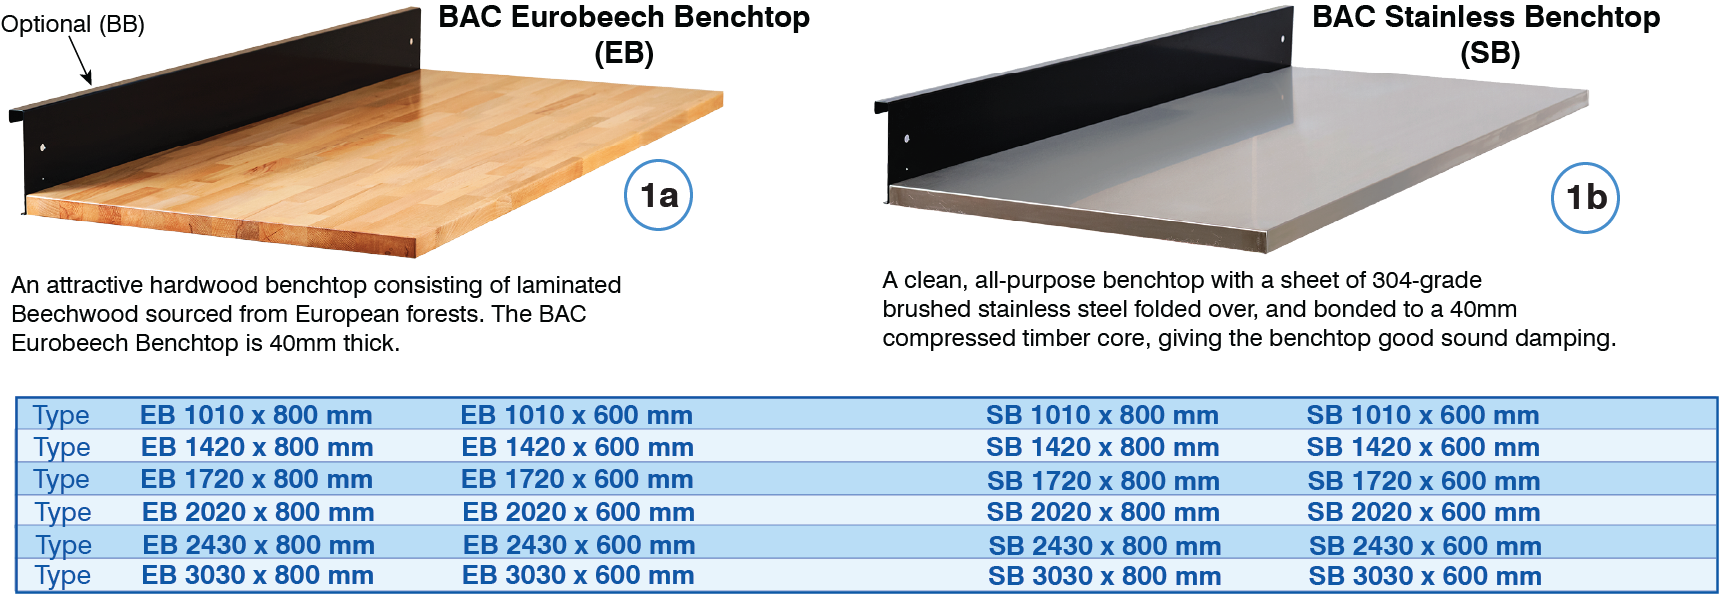 BAC Eurobeech and Stainless Steel Benchtop Sizes Options